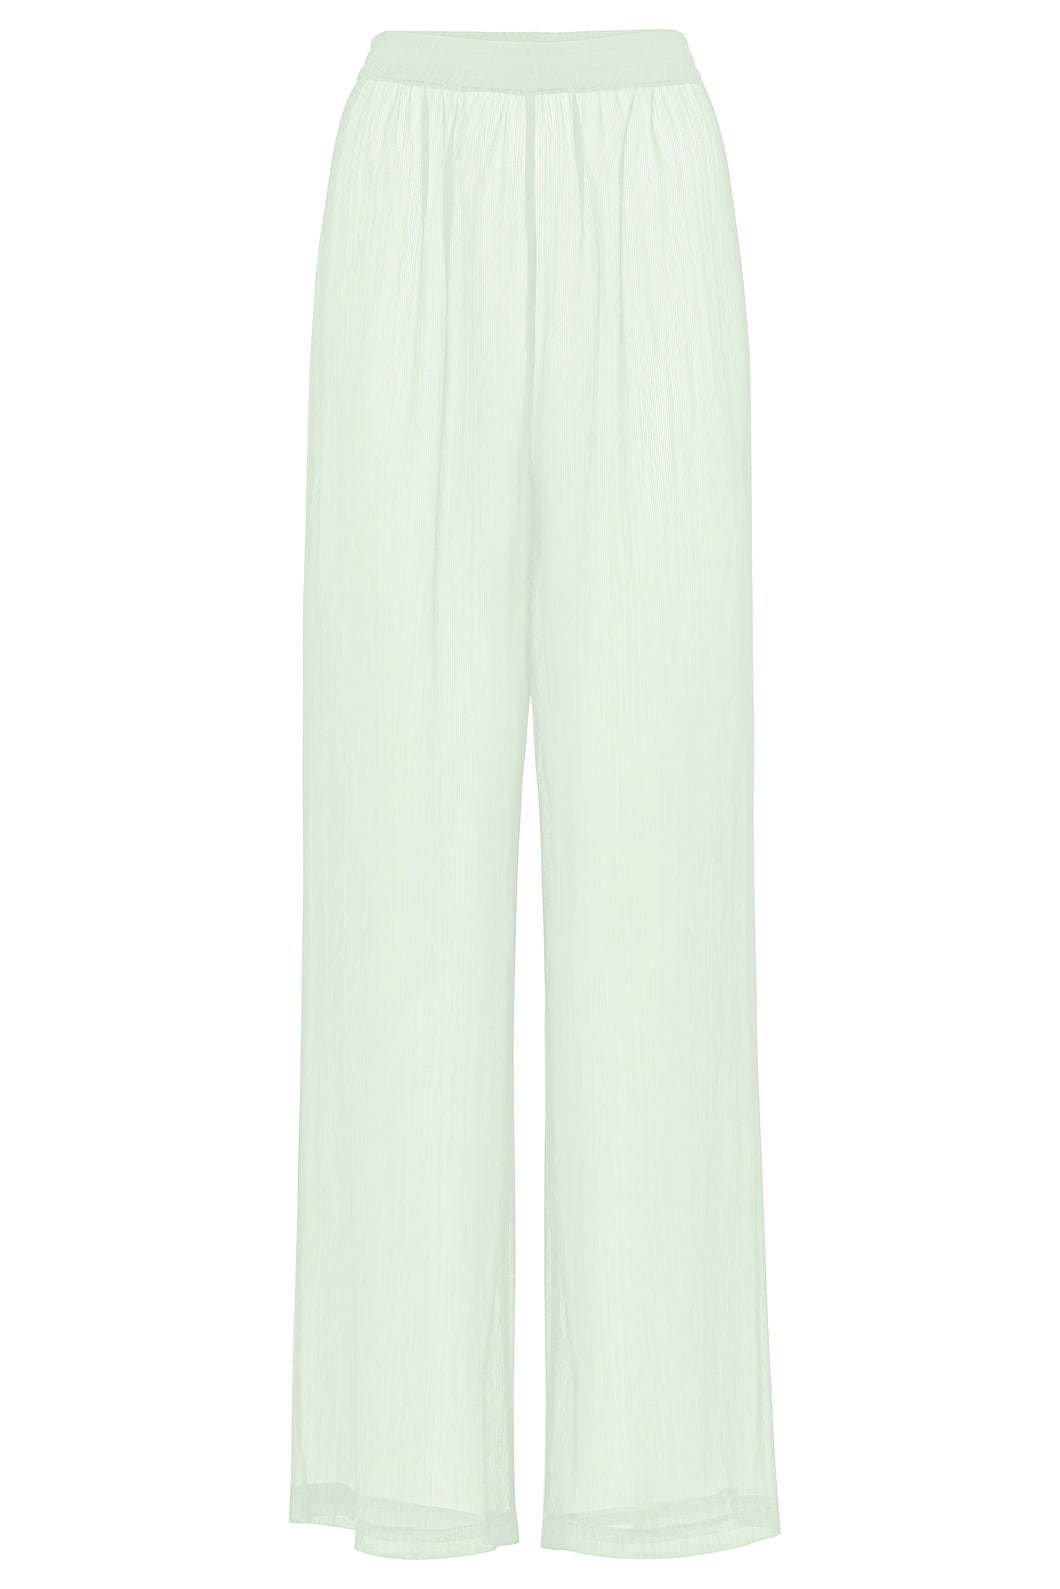 Flat image of the Mika Pant in Aloe